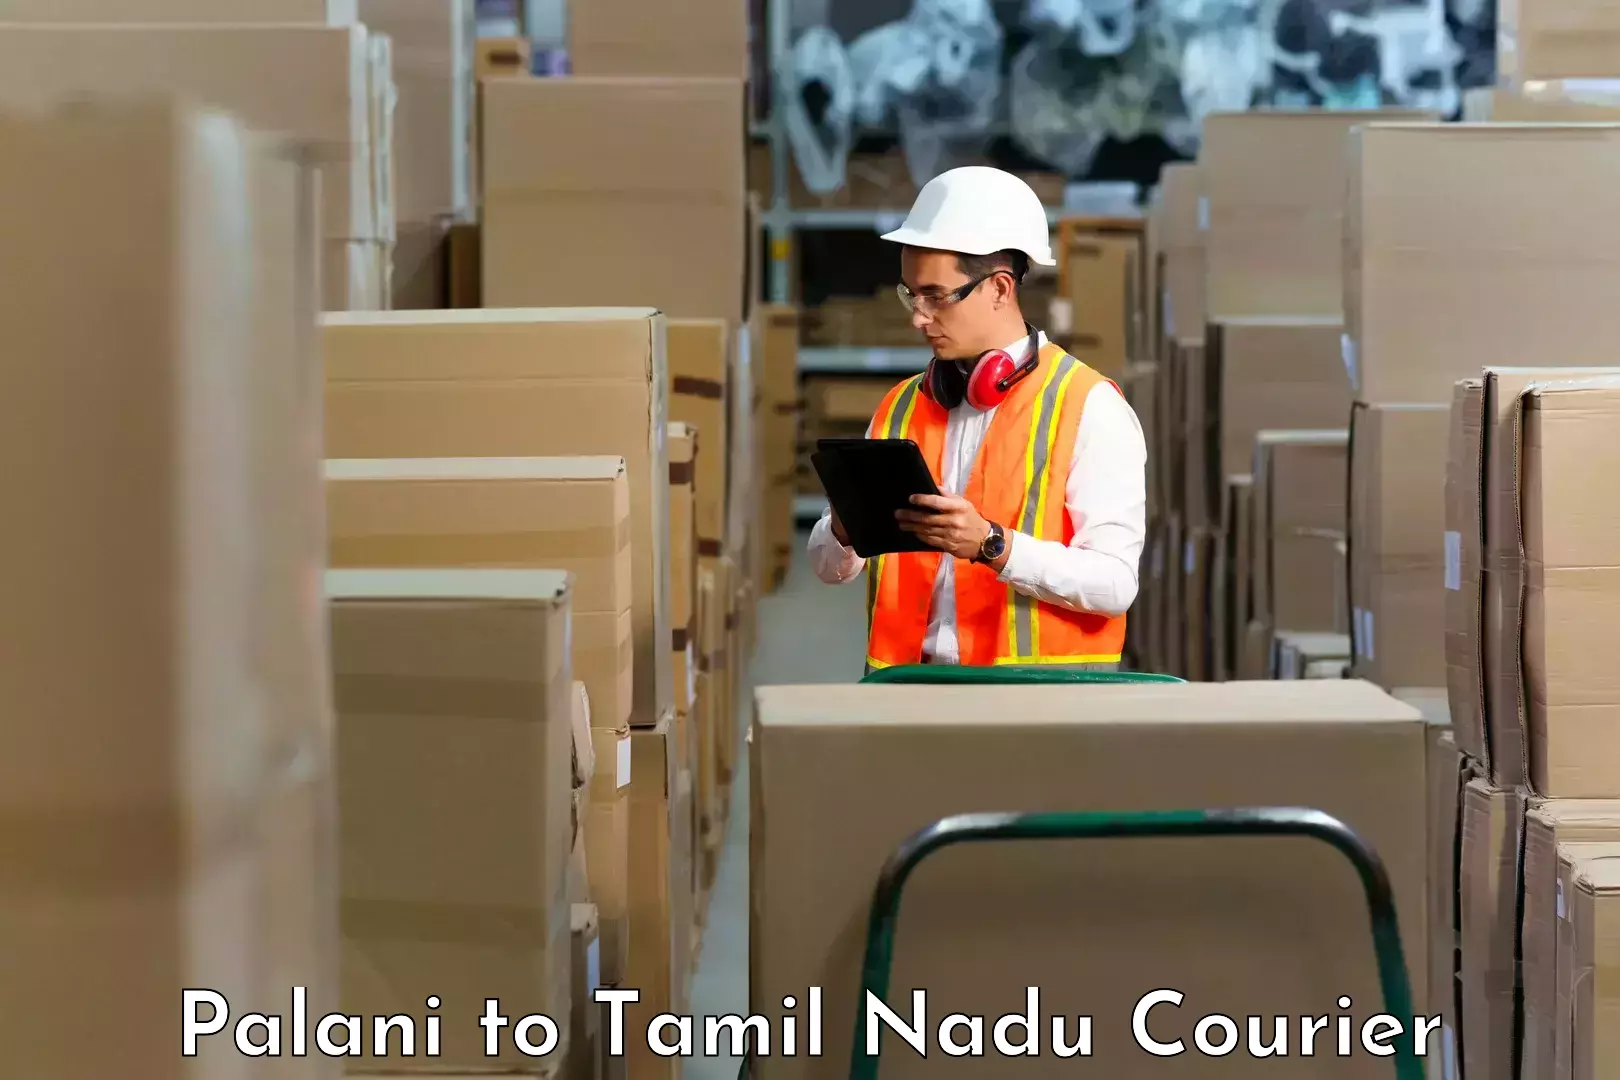 Flexible delivery schedules Palani to Mettupalayam